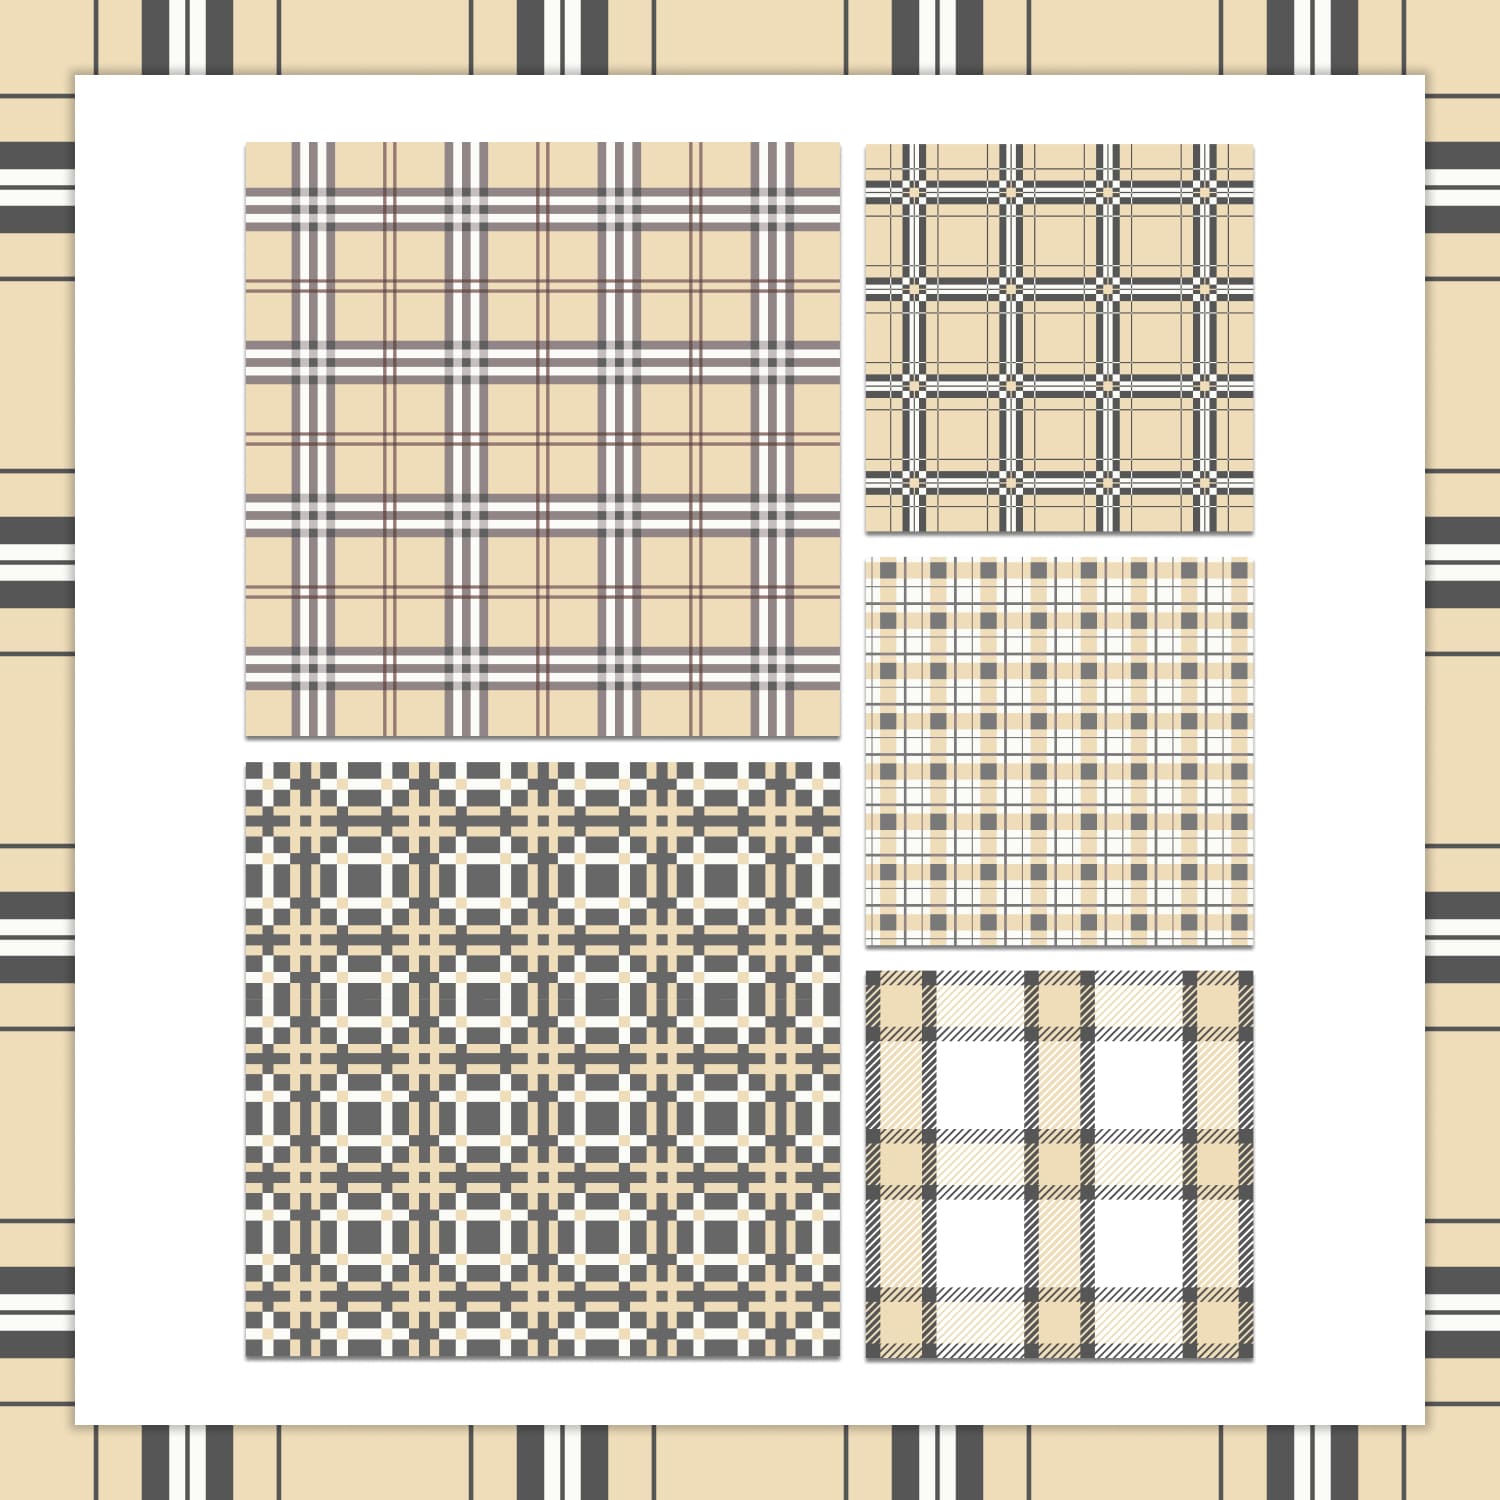 Beige Gingham Patterns cover.